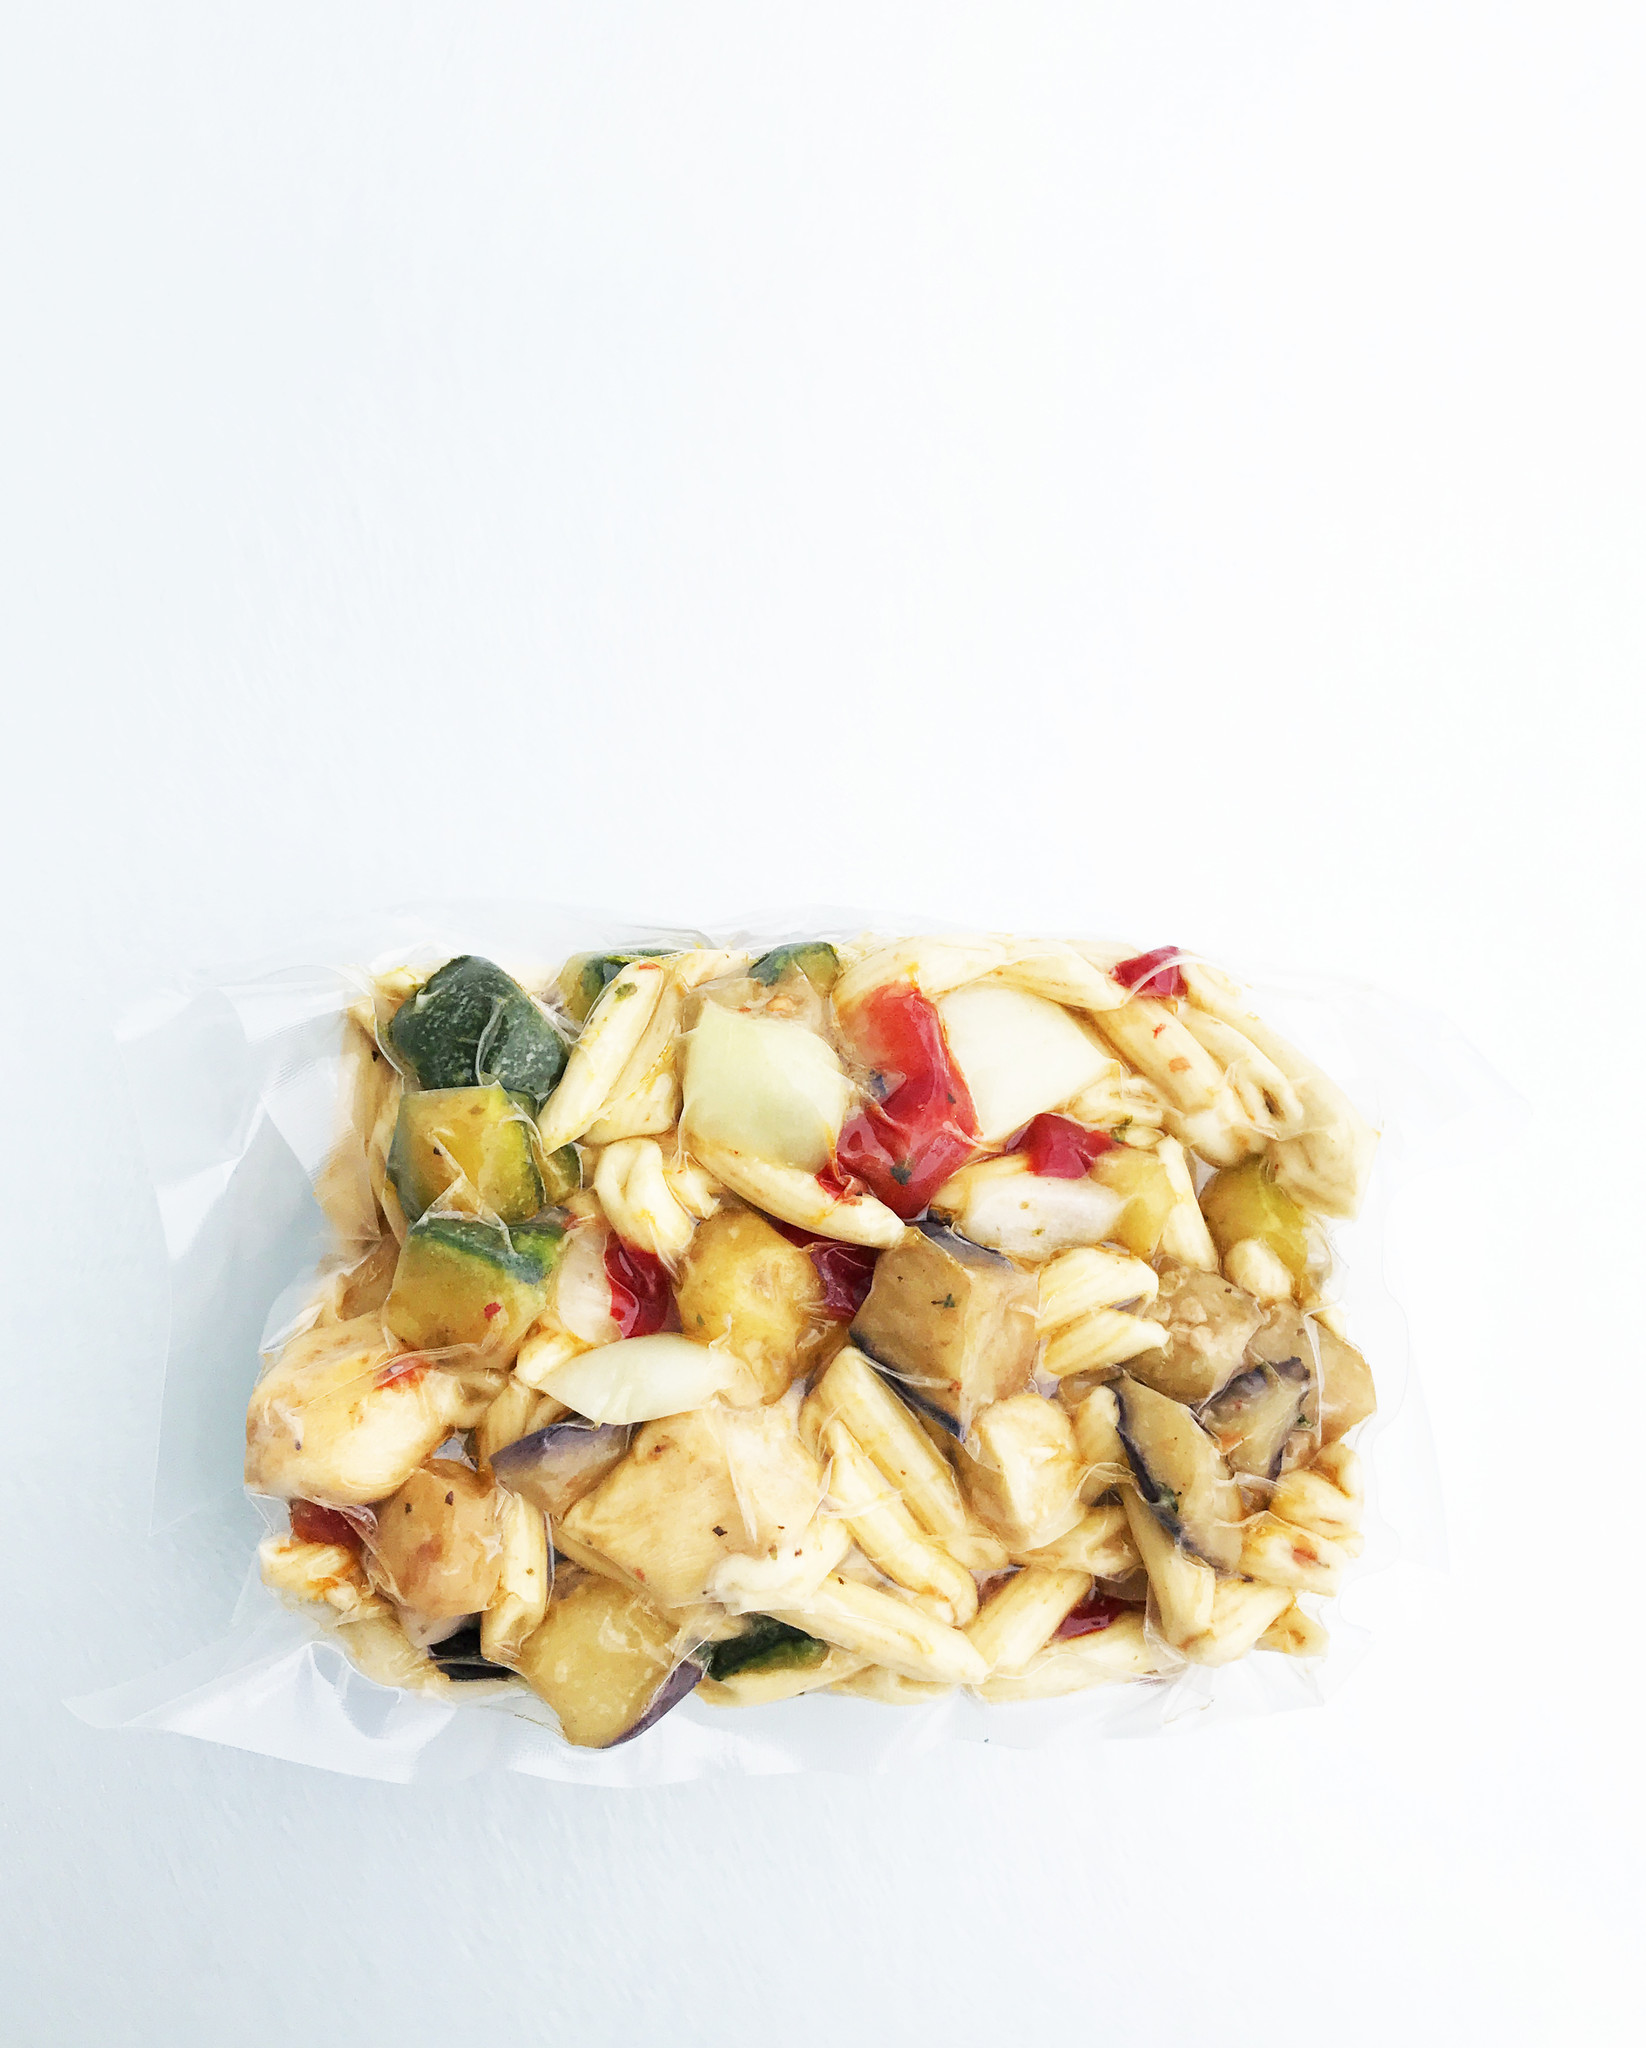 Pennette with ratatouille & poultry (325g)